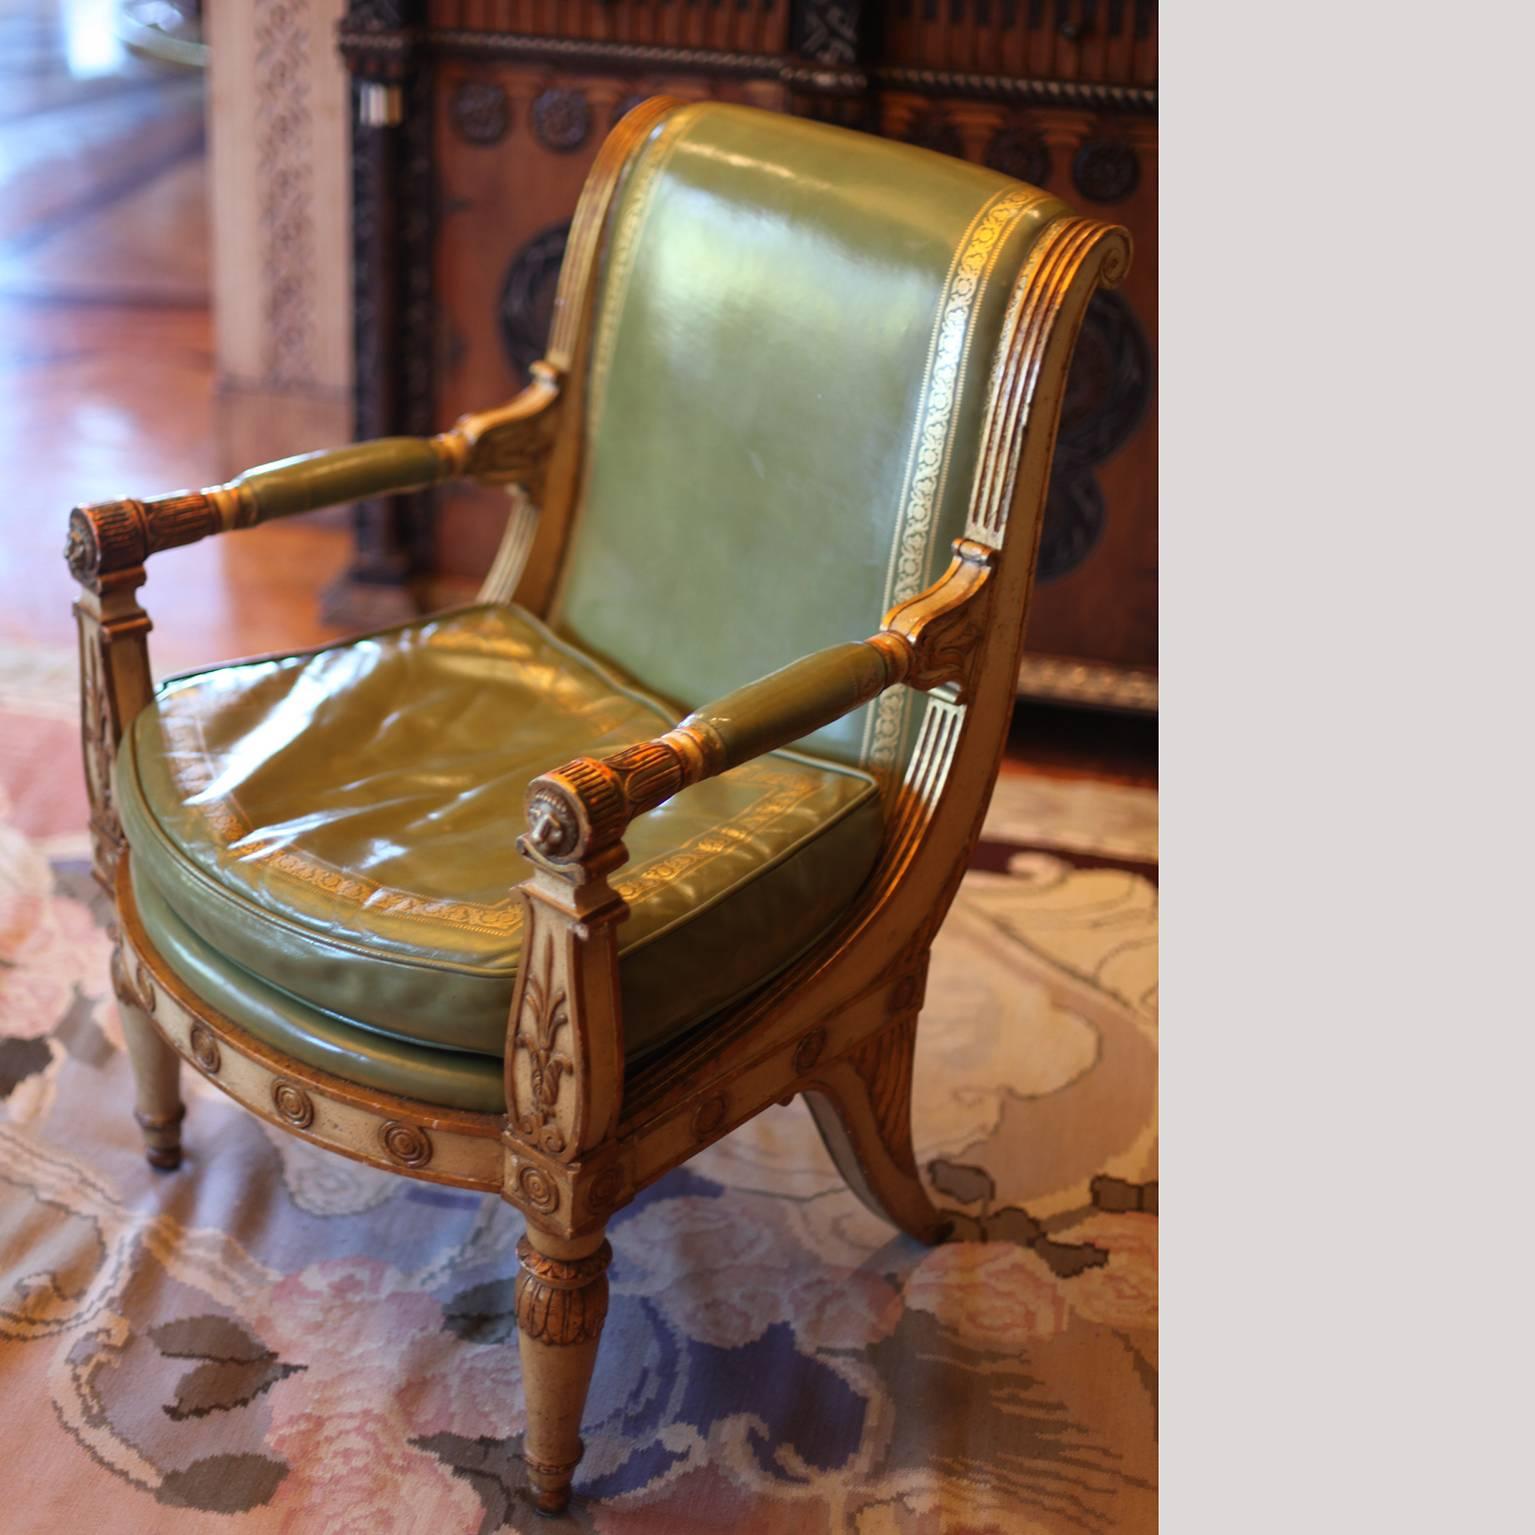 For your consideration a beautiful White Empire armchair with mahogany wood frame. Regency ornamentation. Antique white with golf leaf accents. Green leather has gold ornamentation as well. 

Amazing chairs. Six chairs are available. Price per